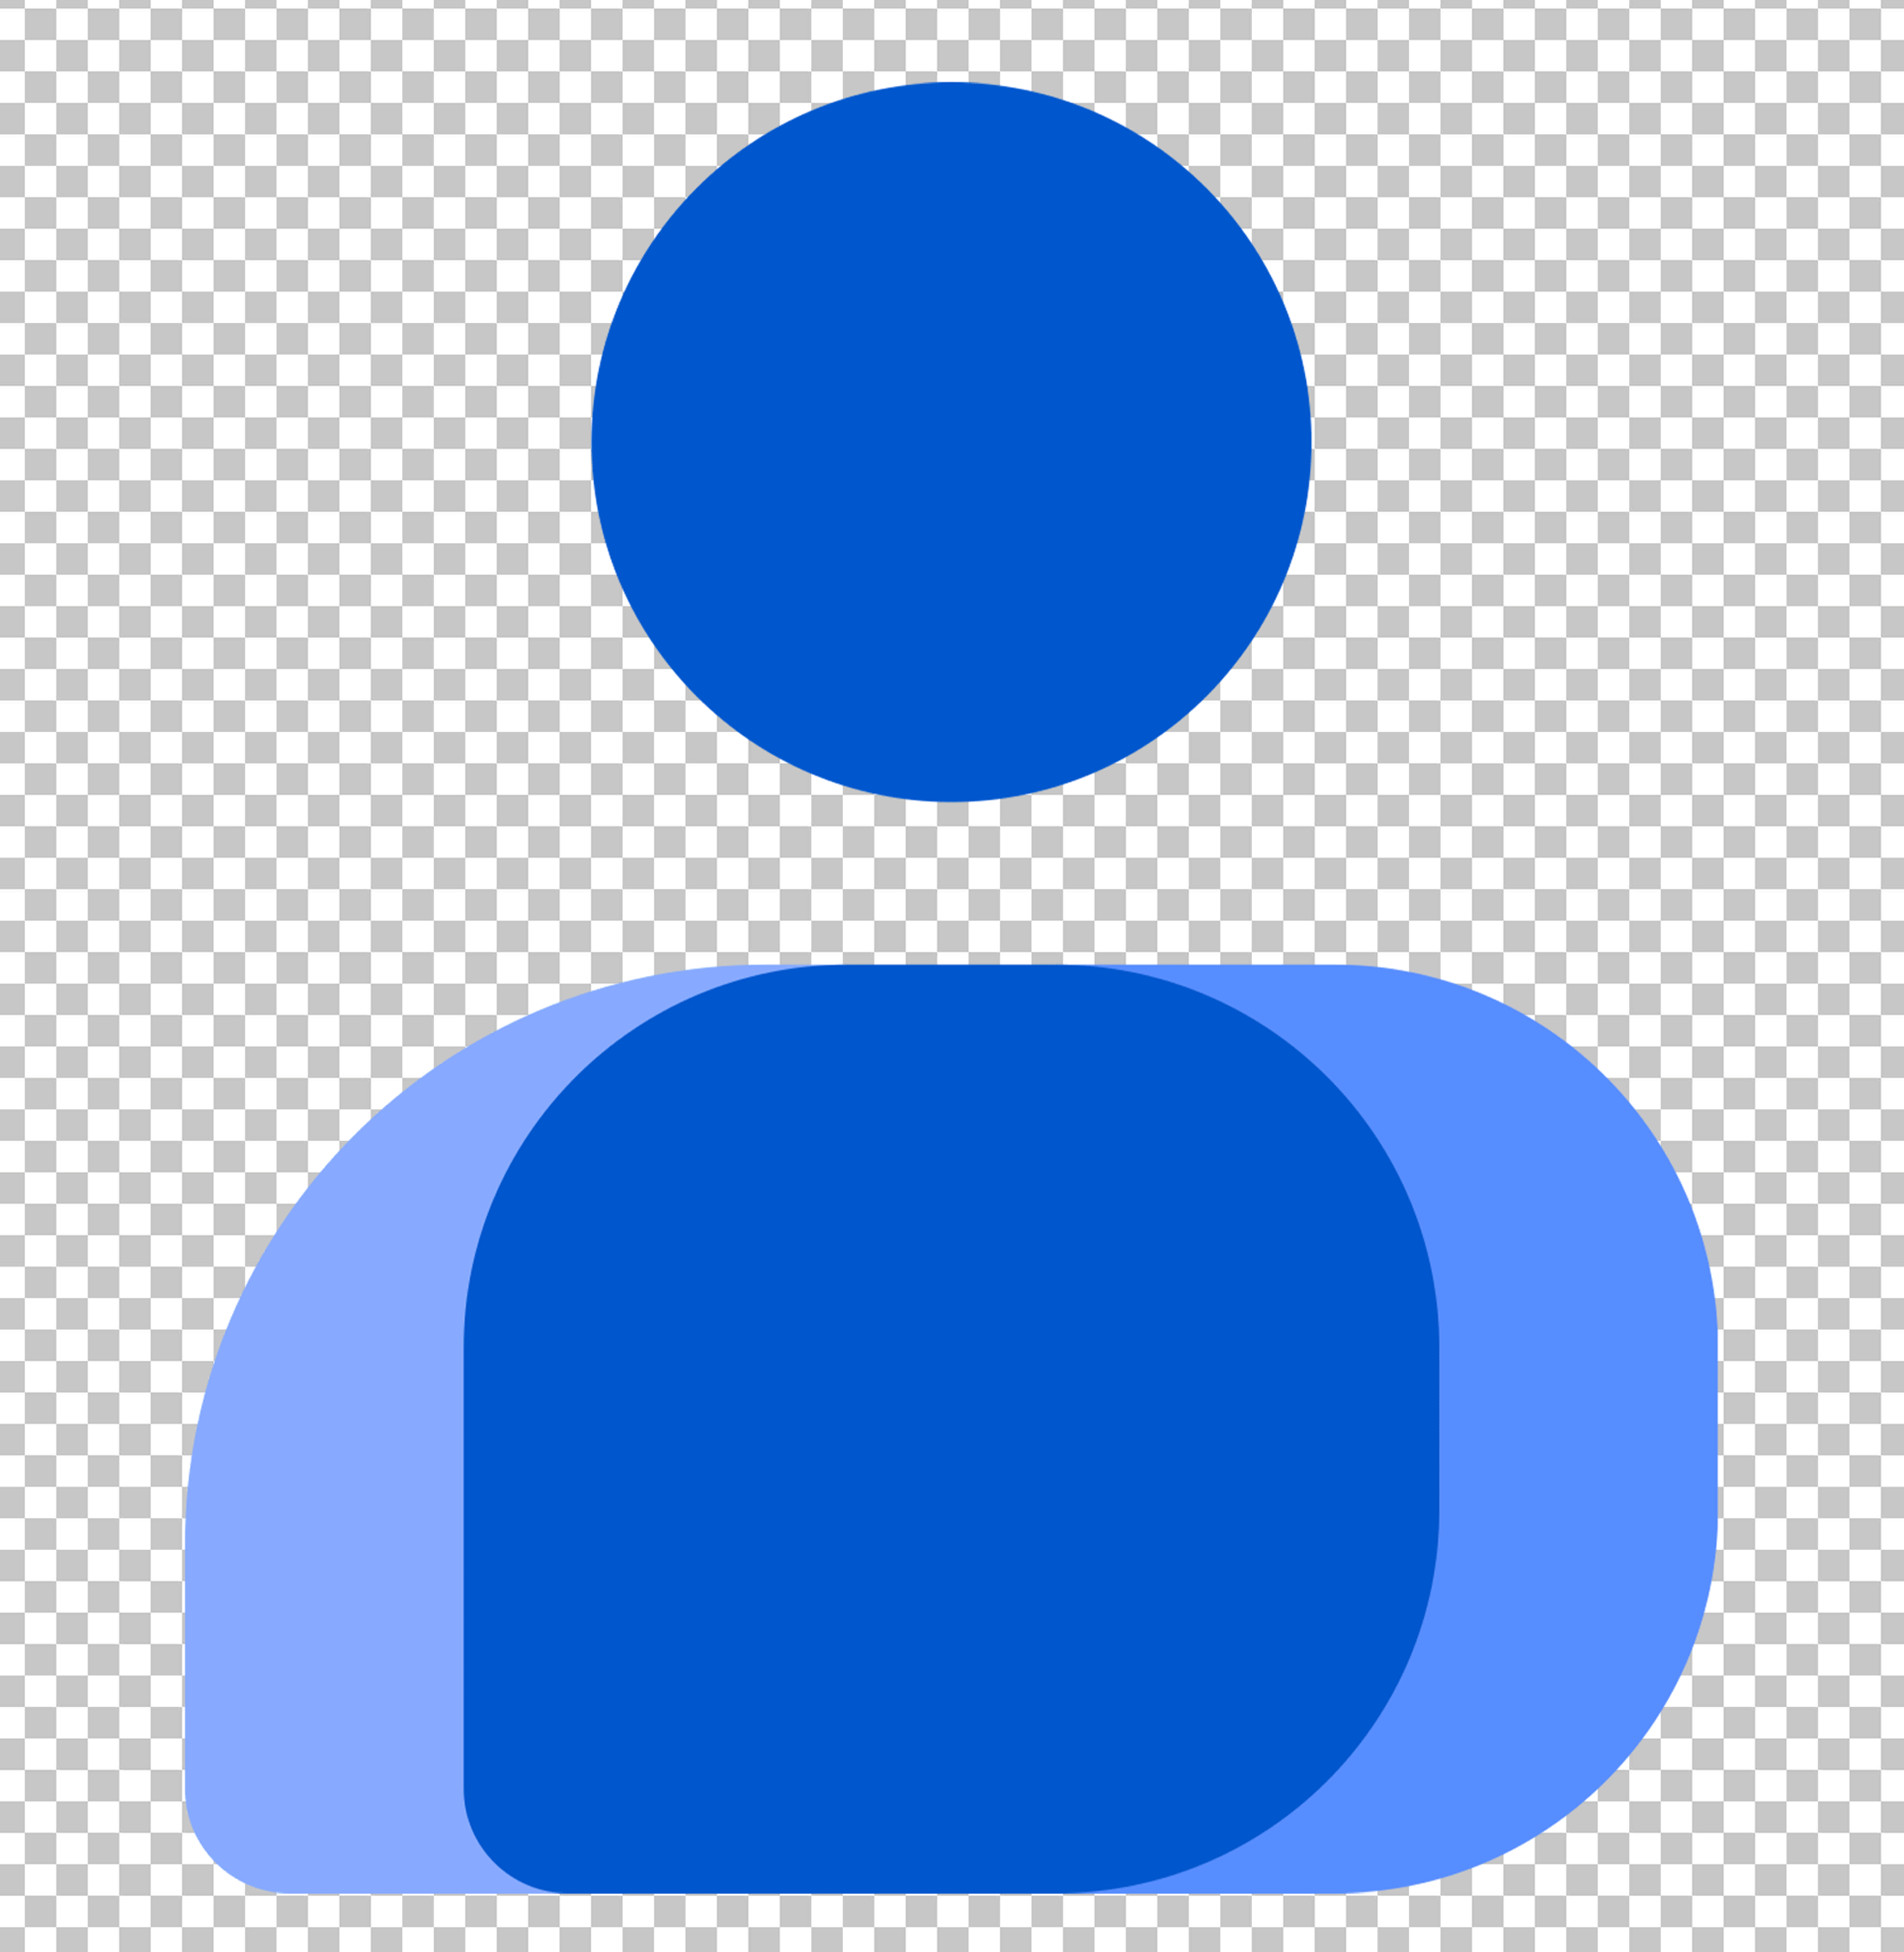 Google Contacts with Blue Person Icon Logo PNG Image